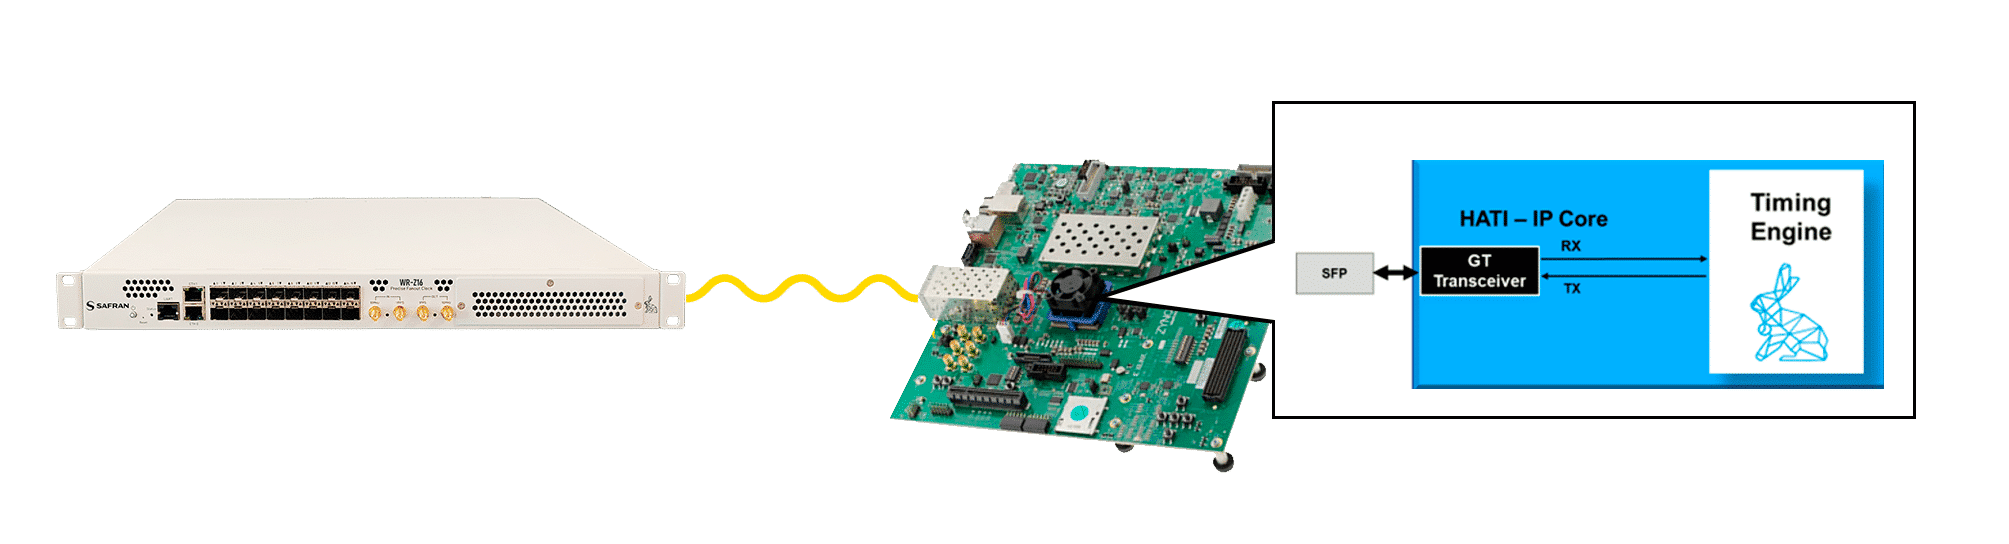 HATI reference design based on Xilinx ZCU102